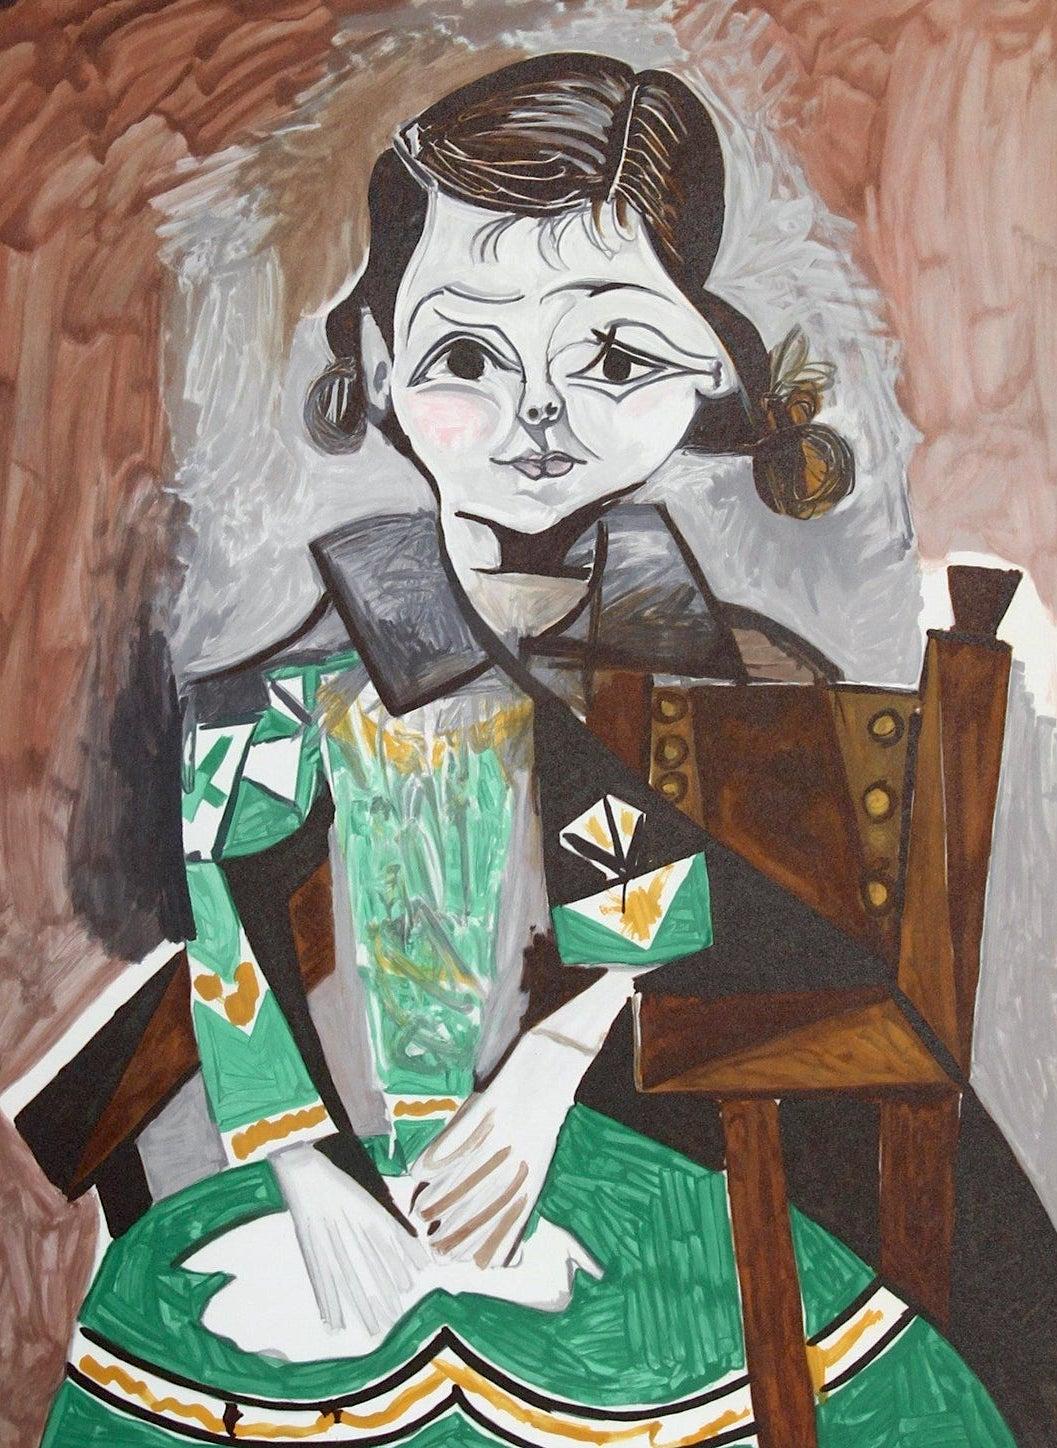 PETITE FILLE A LA ROBE VERTE(PalomaPicasso) Lithograph, Little Girl Green Dress - Print by (after) Pablo Picasso